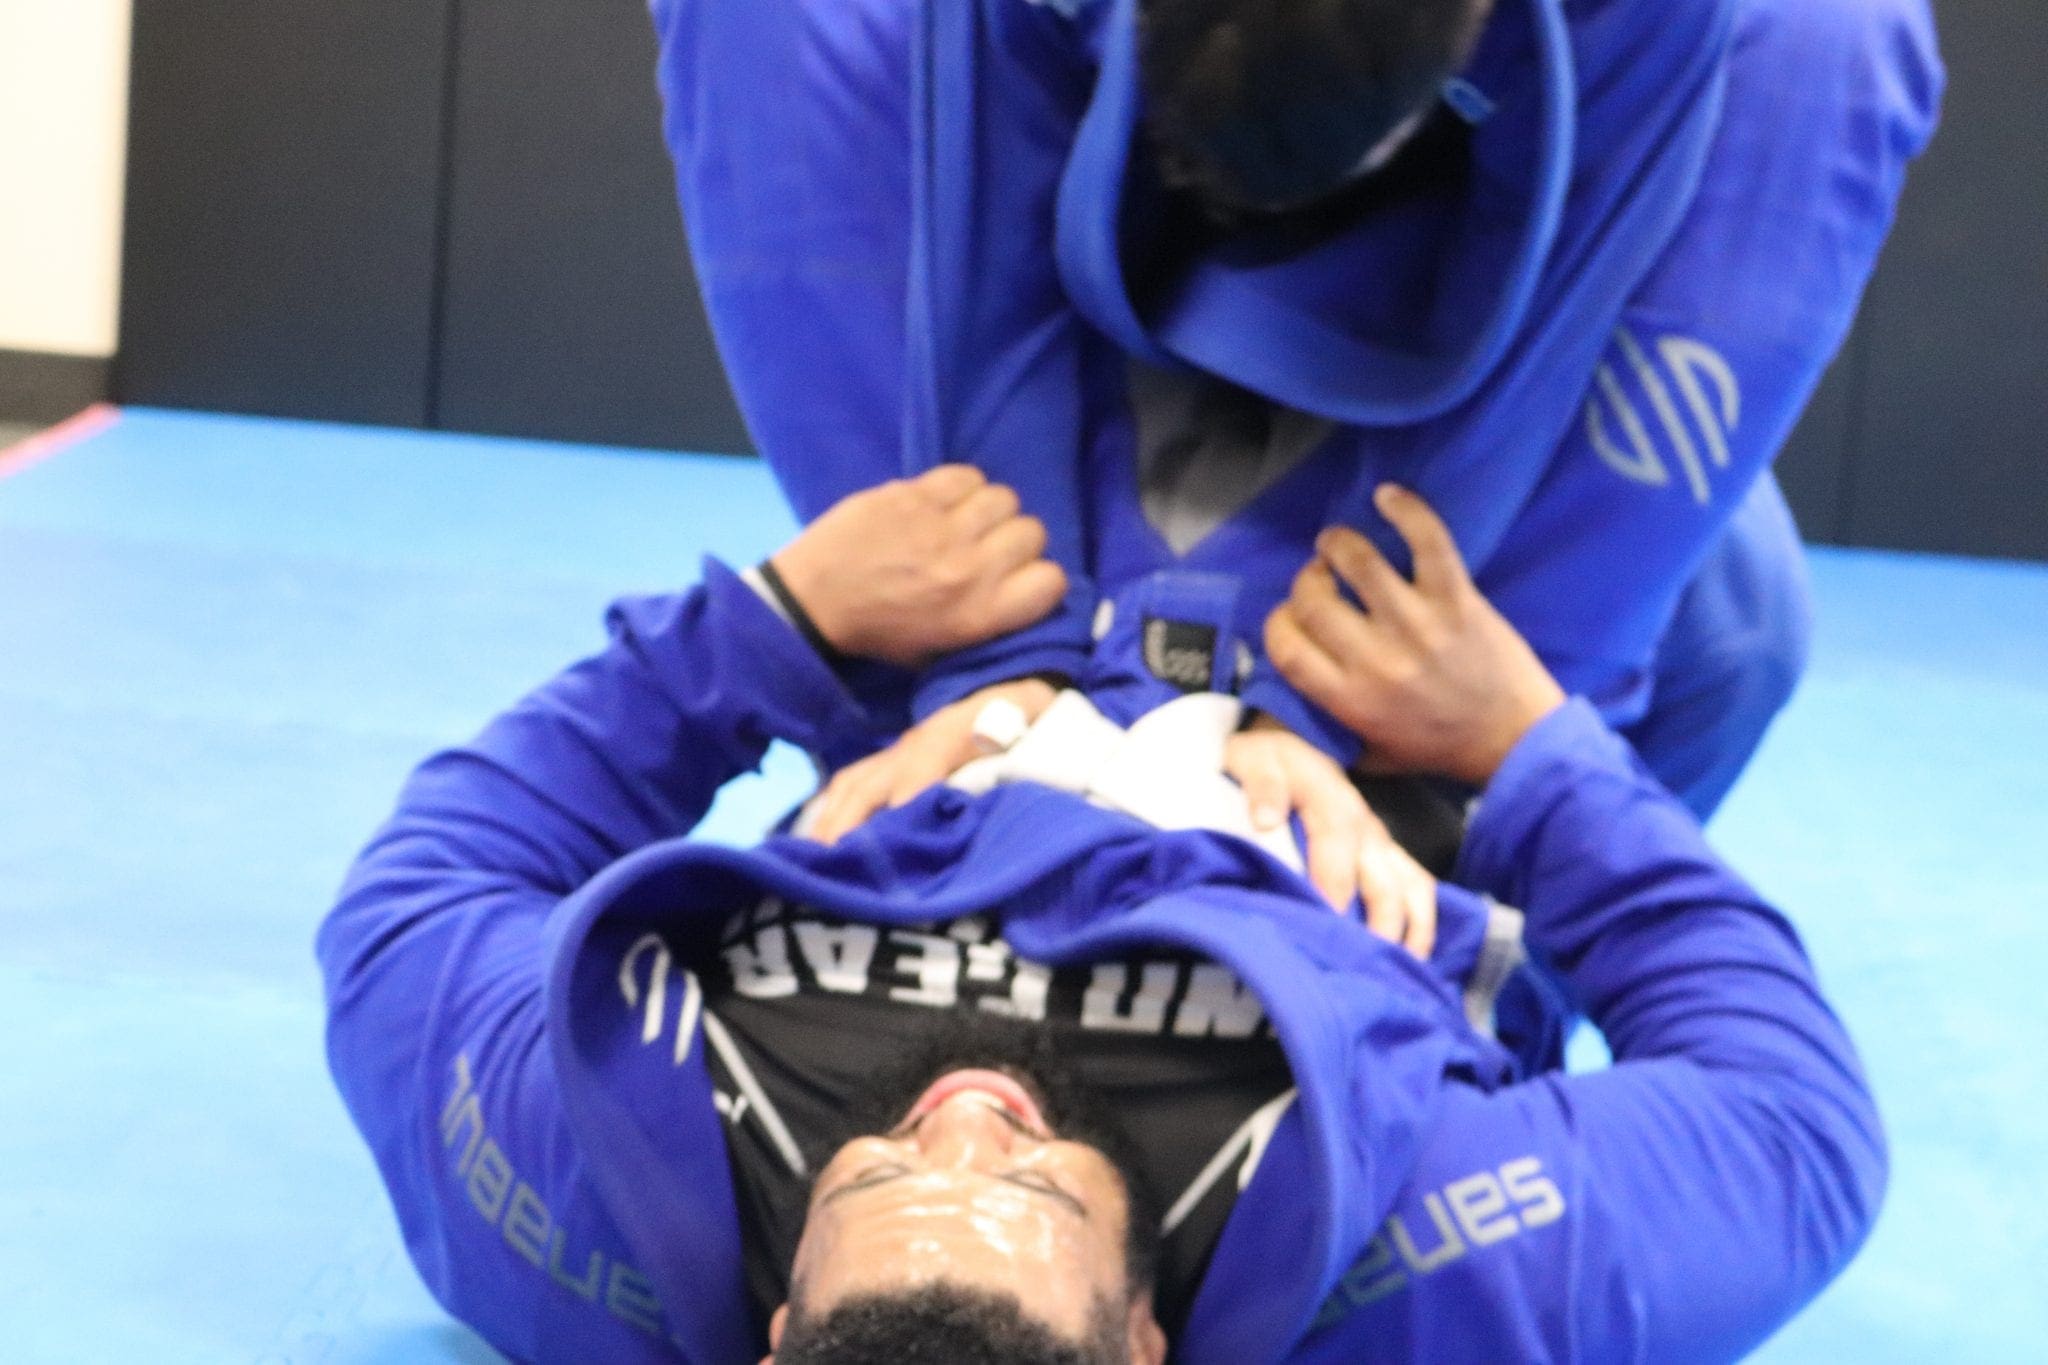 Some closed guard action in a bjj class